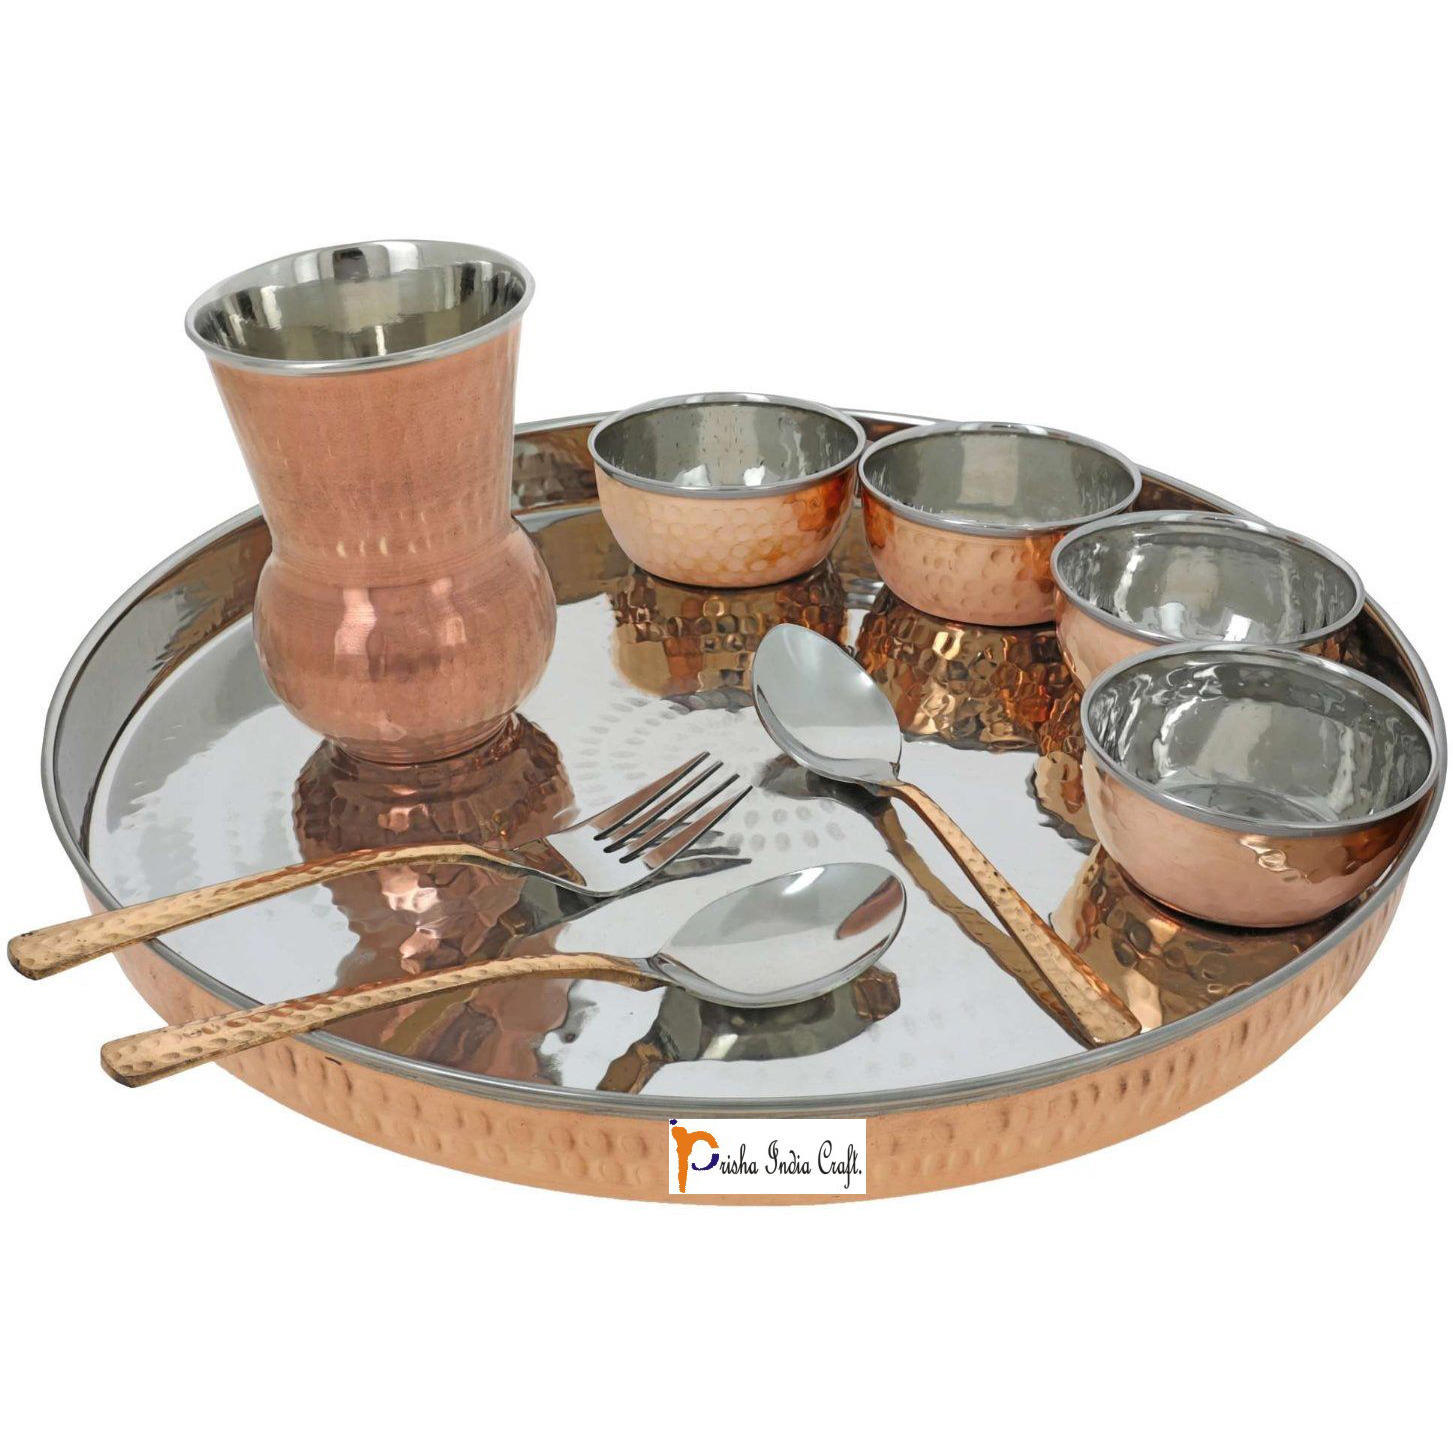 Prisha India Craft B. Dinnerware Traditional Stainless Steel Copper Dinner Set of Thali Plate, Bowls, Glass and Spoons, Dia 13  With 1 Luxury Style Pitcher Jug - Christmas Gift